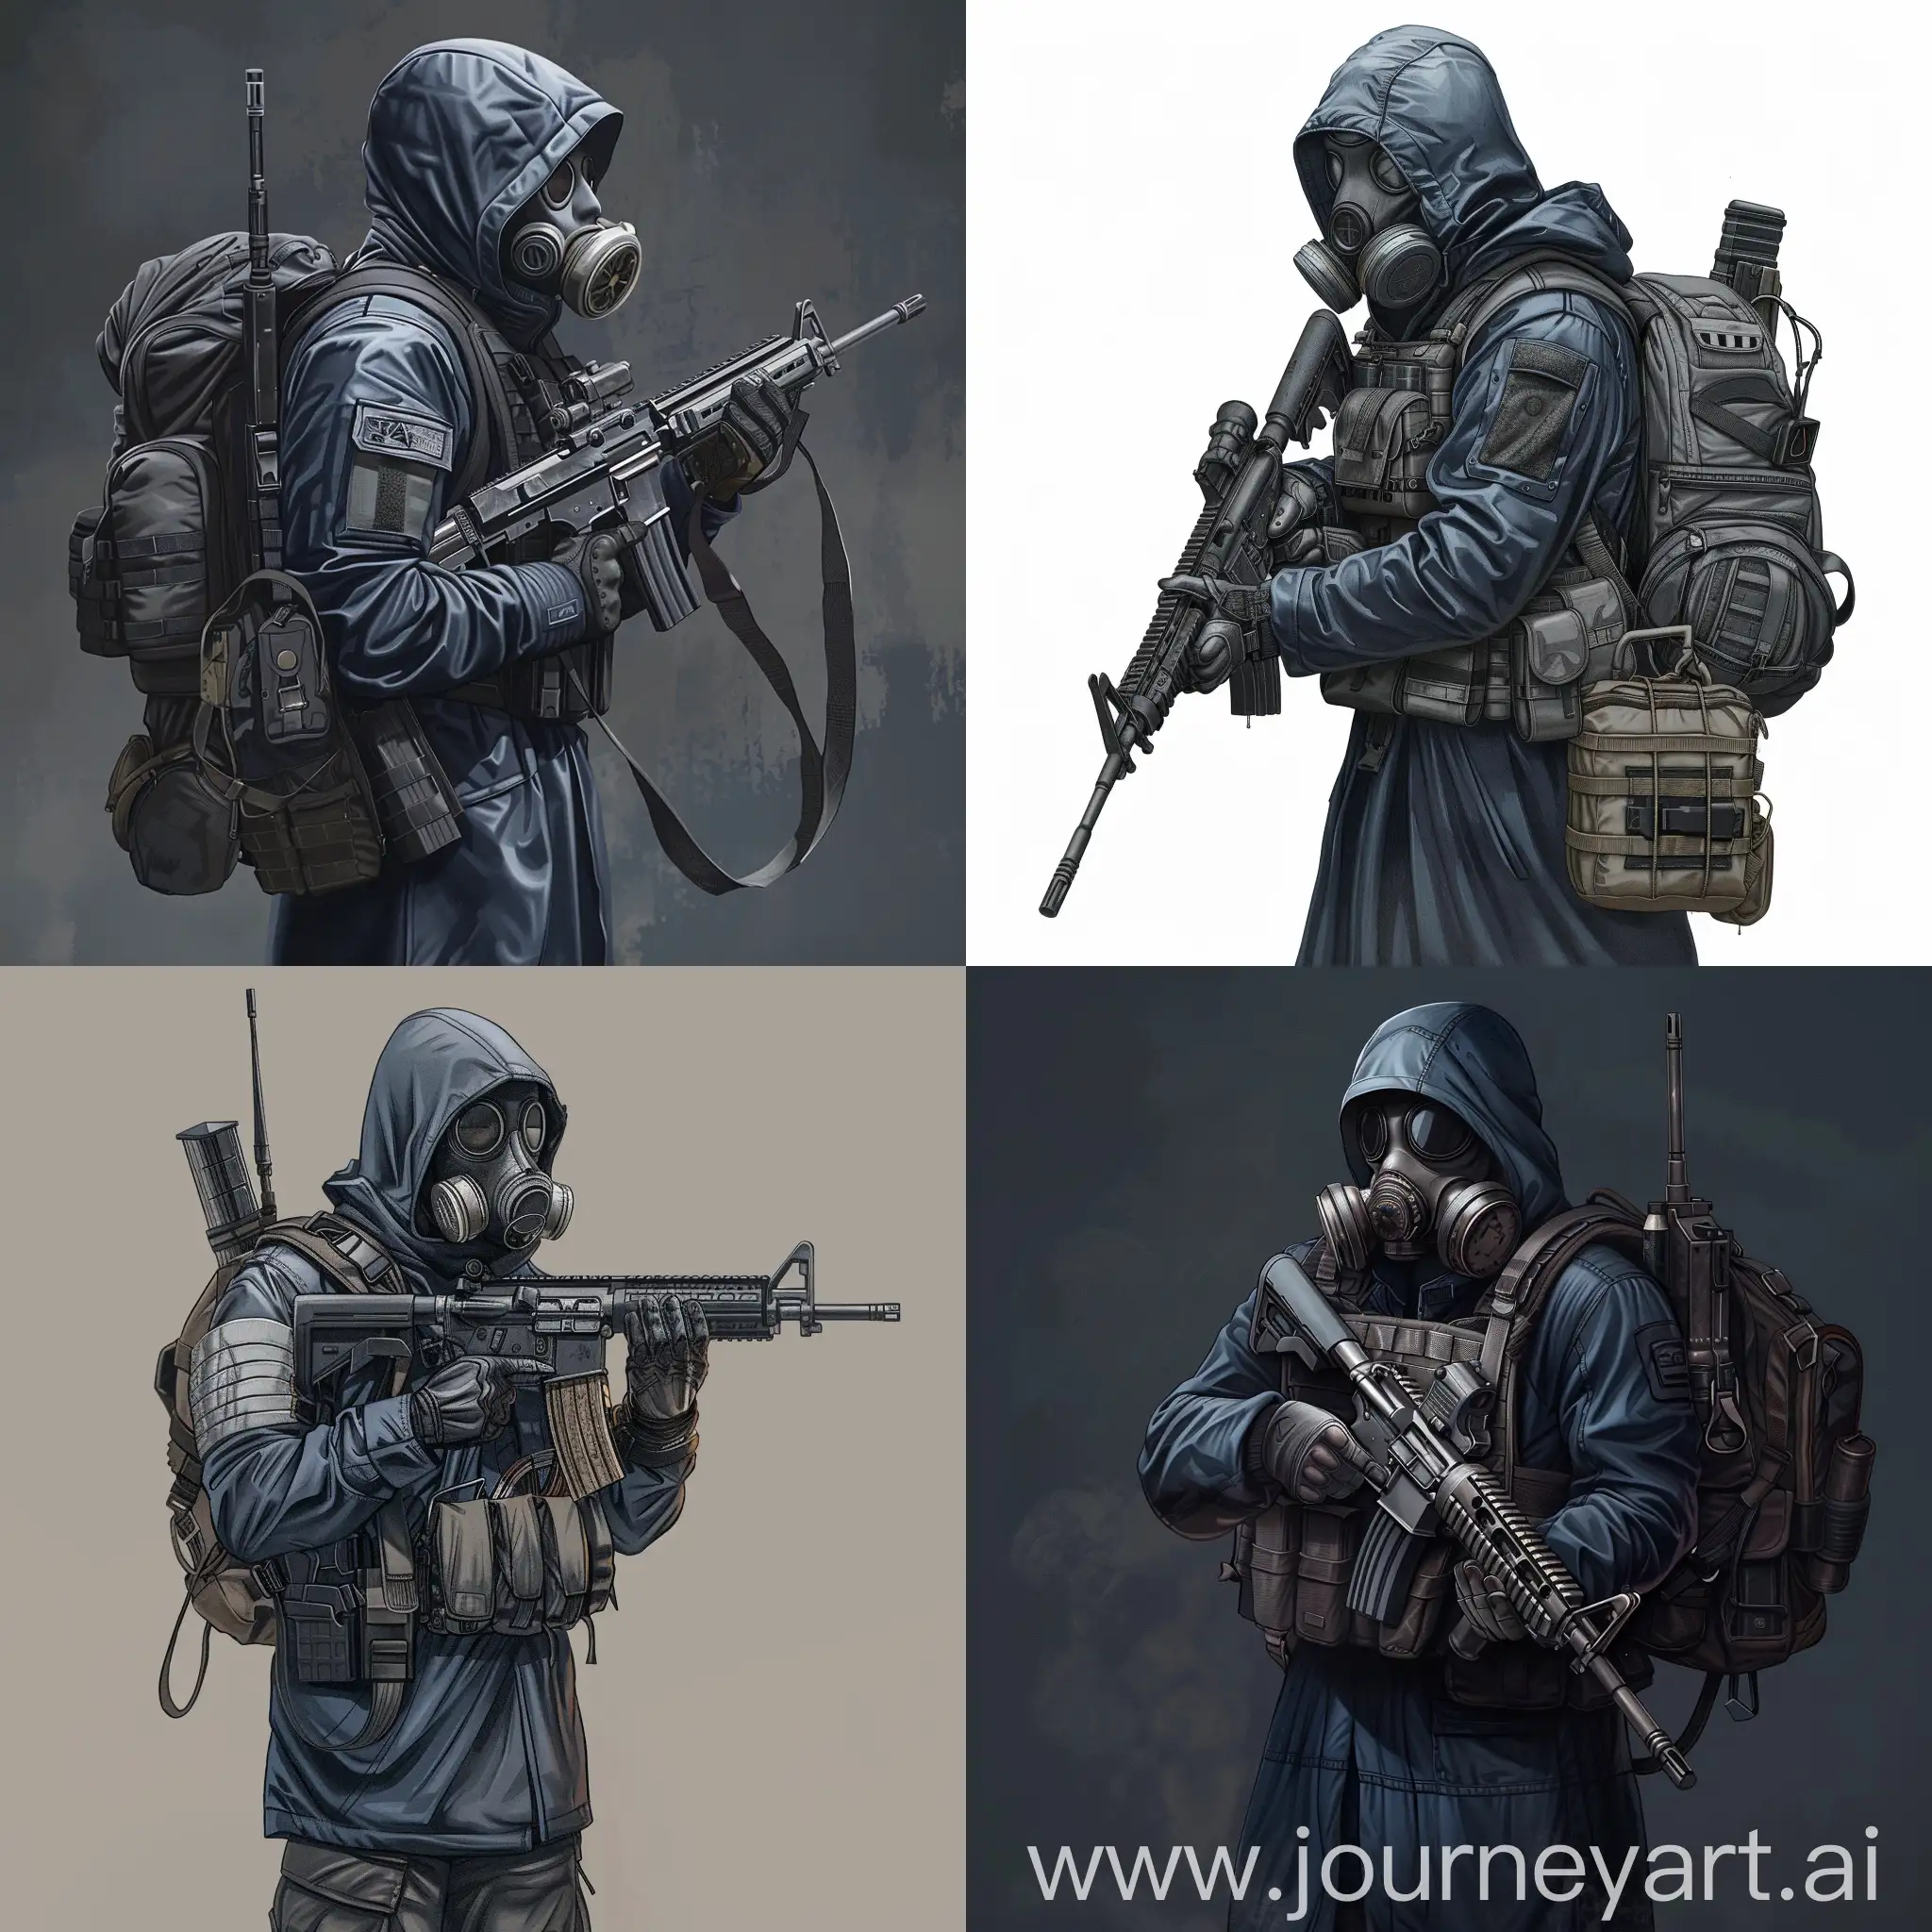 Mercenary-Character-in-STALKER-Universe-with-Rifle-and-Gas-Mask